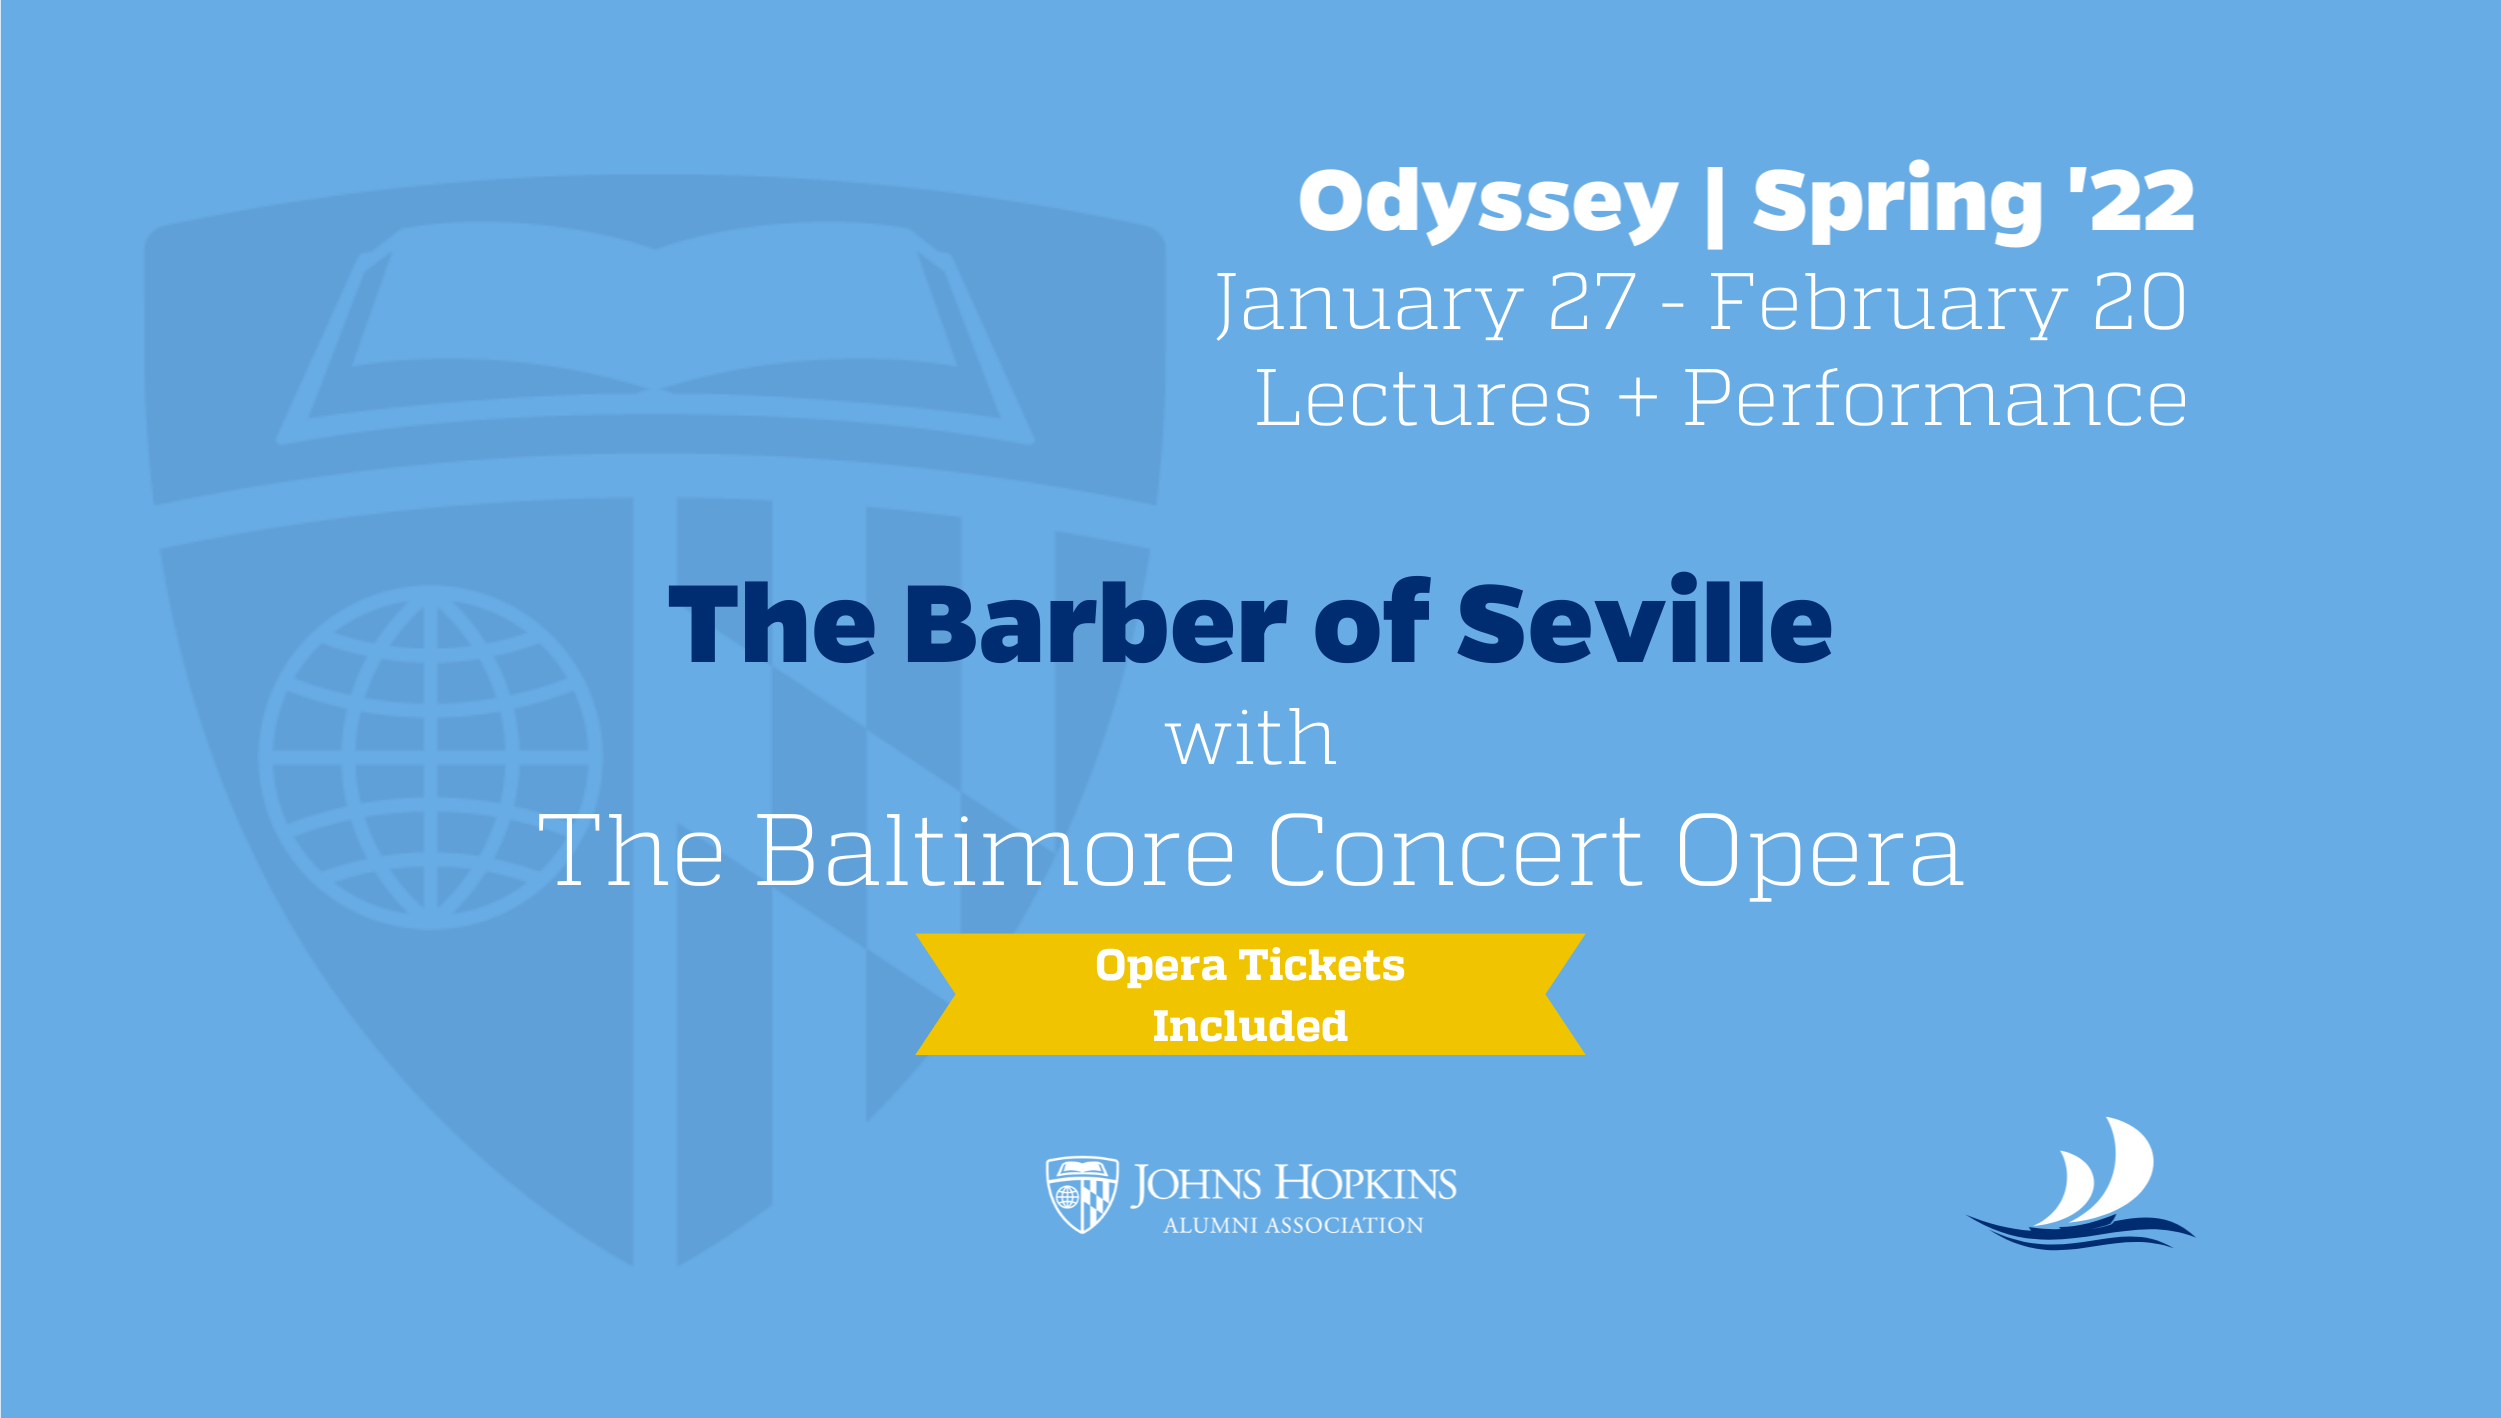 Header image for Barber of Seville Odyssey Course with tickets to show